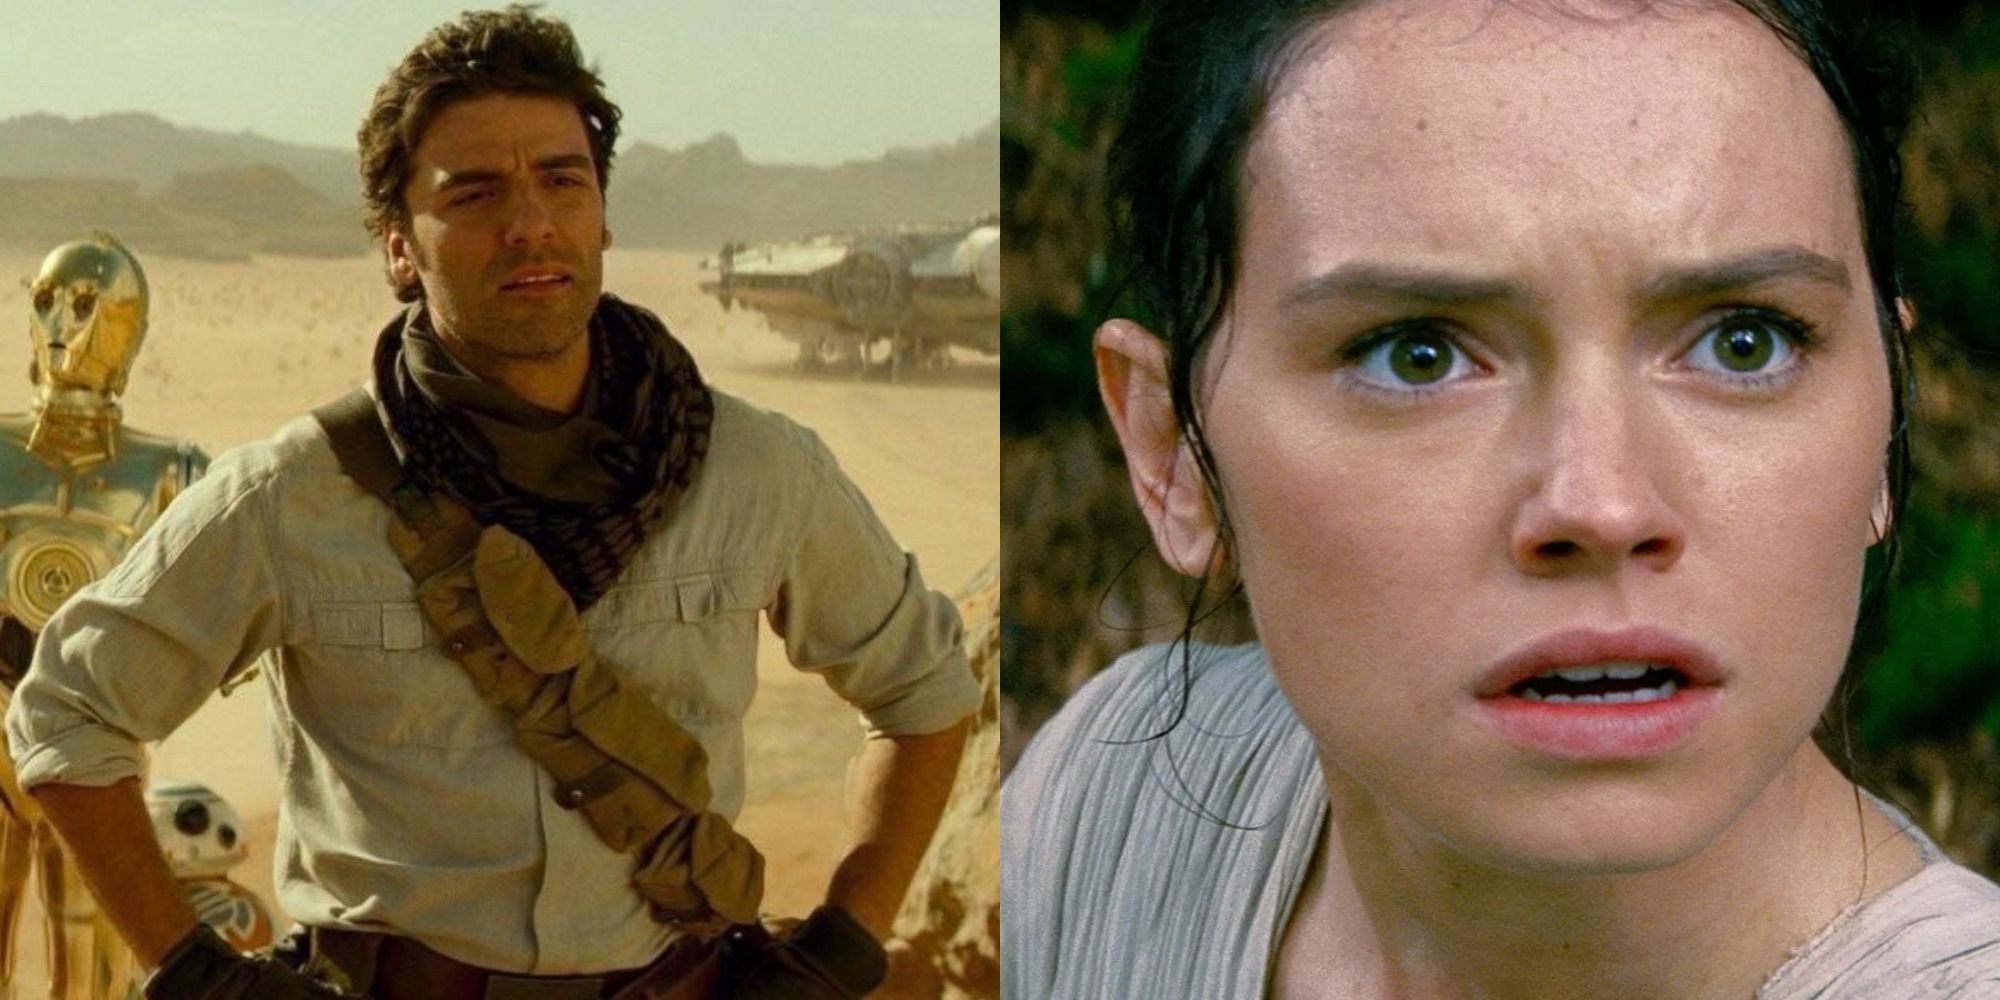 Split image of Poe Dameron (Oscar Isaac) with hands on hips and Rey (Daisy Ridley) looking worried in Star Wars: The Rise of Skywalker